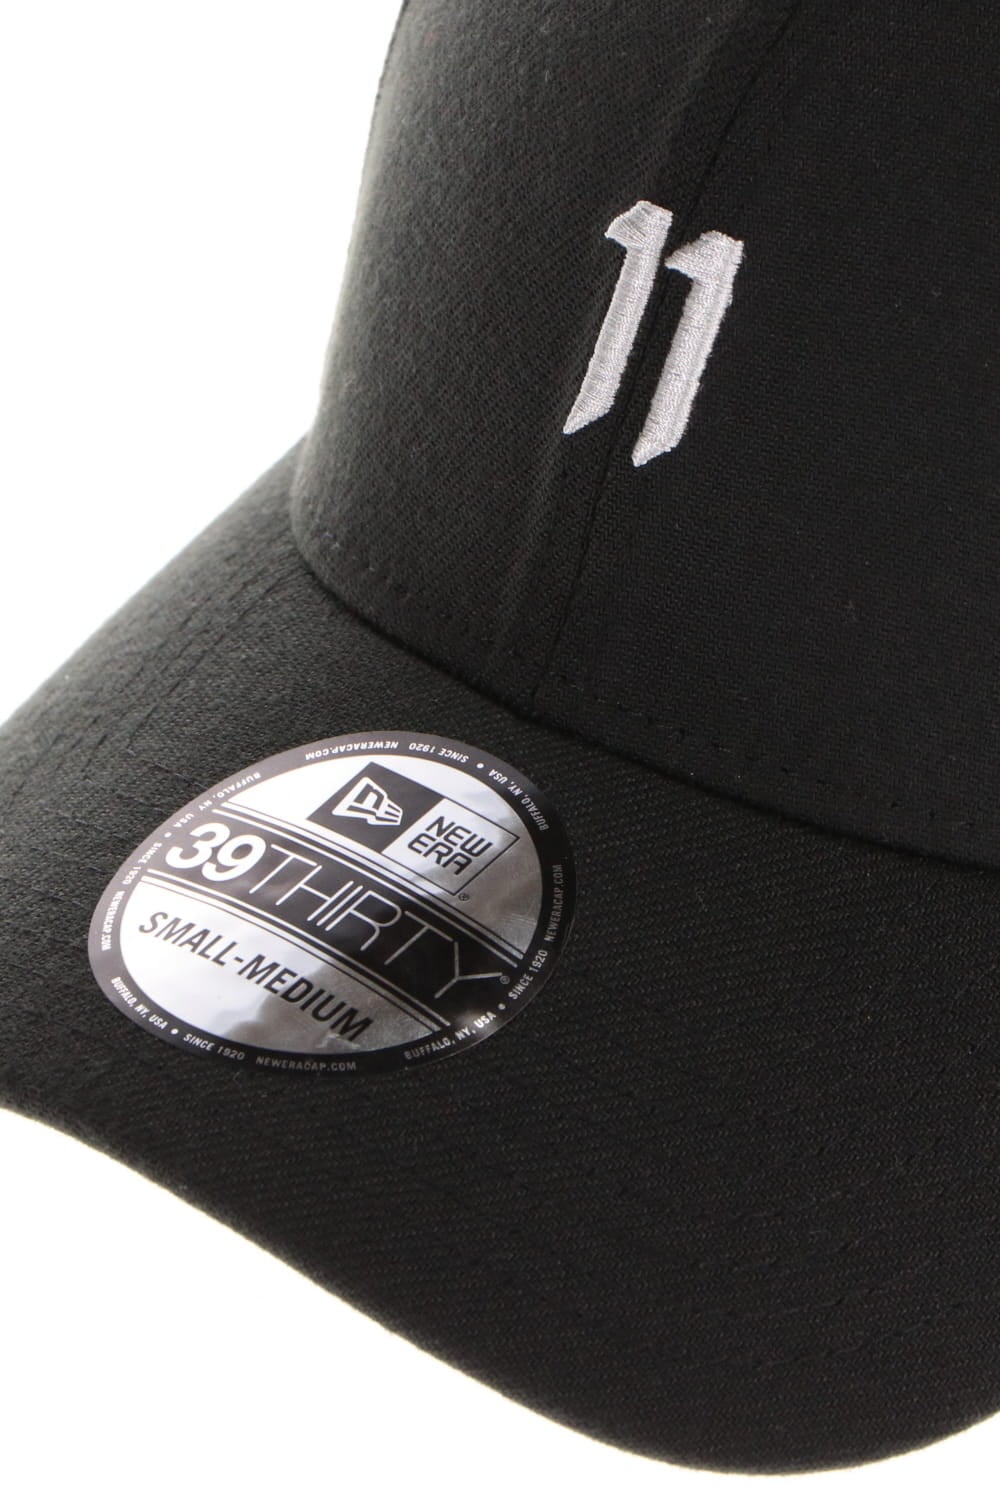 11-by-bbs-new-era-39-therty-cap | イレブン バイ ボリス ビジャン ...